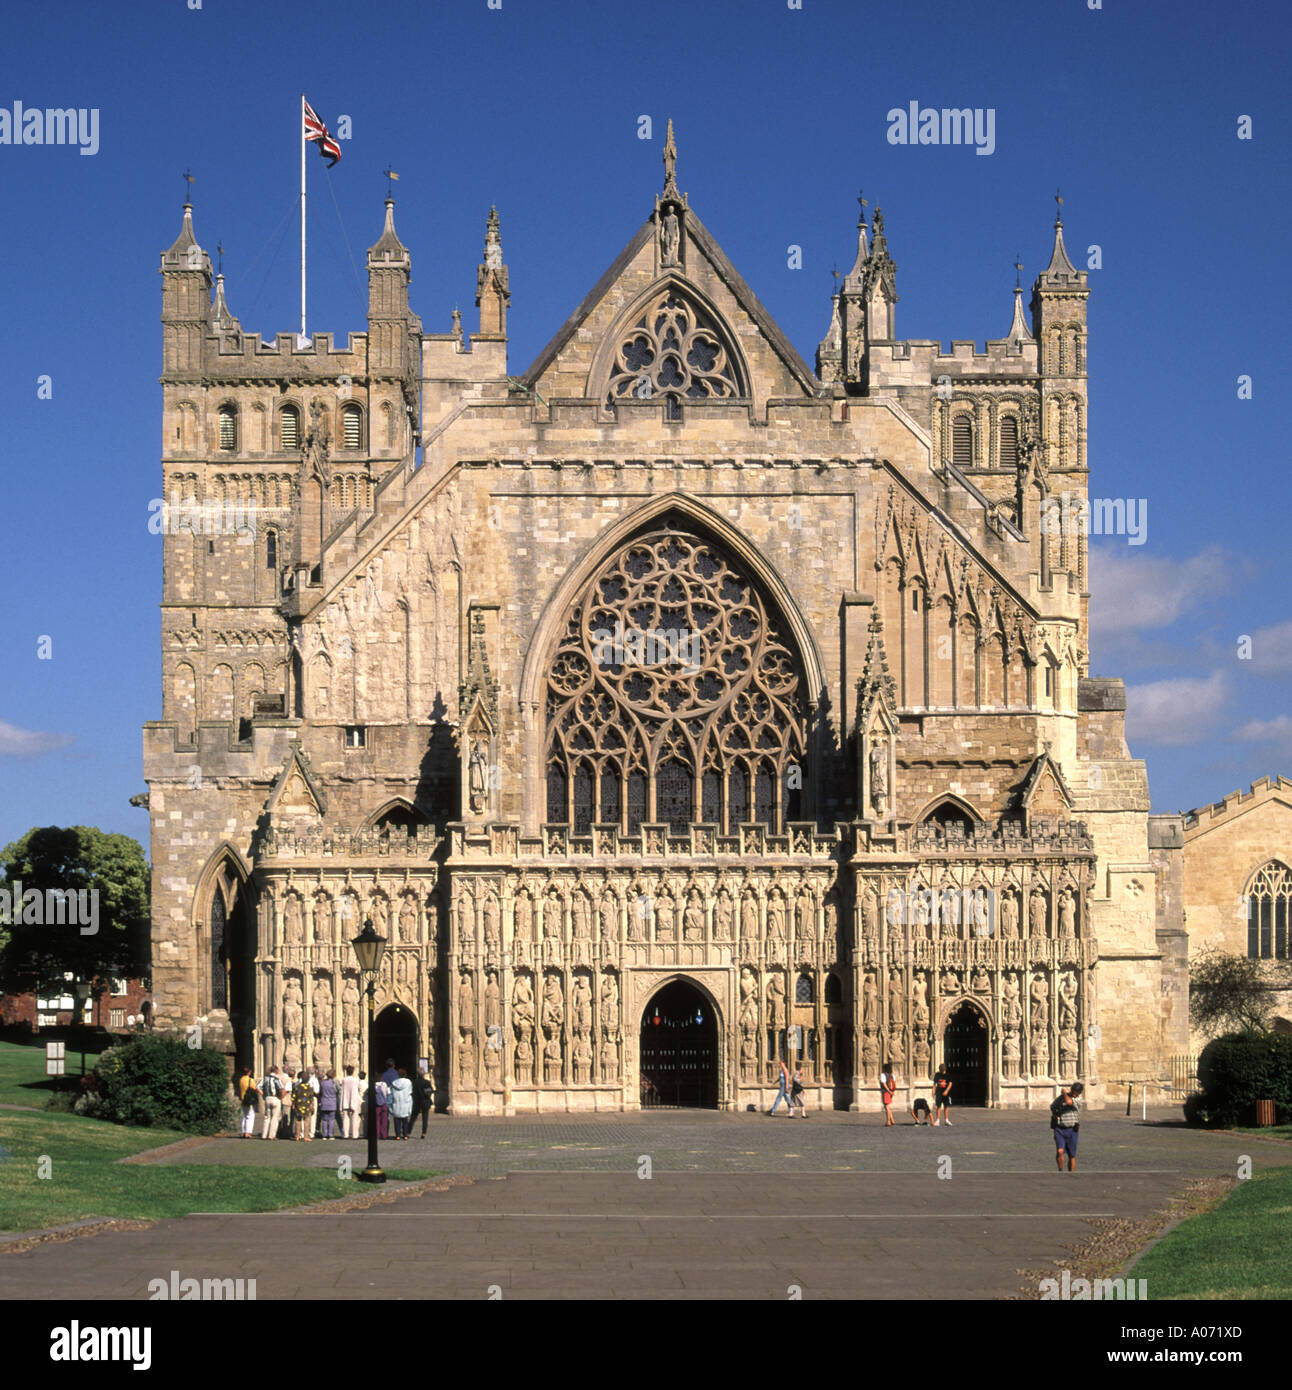 Union flag above Norman Gothic architecture of the West Front & towers of historical Anglican Exeter Cathedral building in Cathedral Square Devon UK Stock Photo